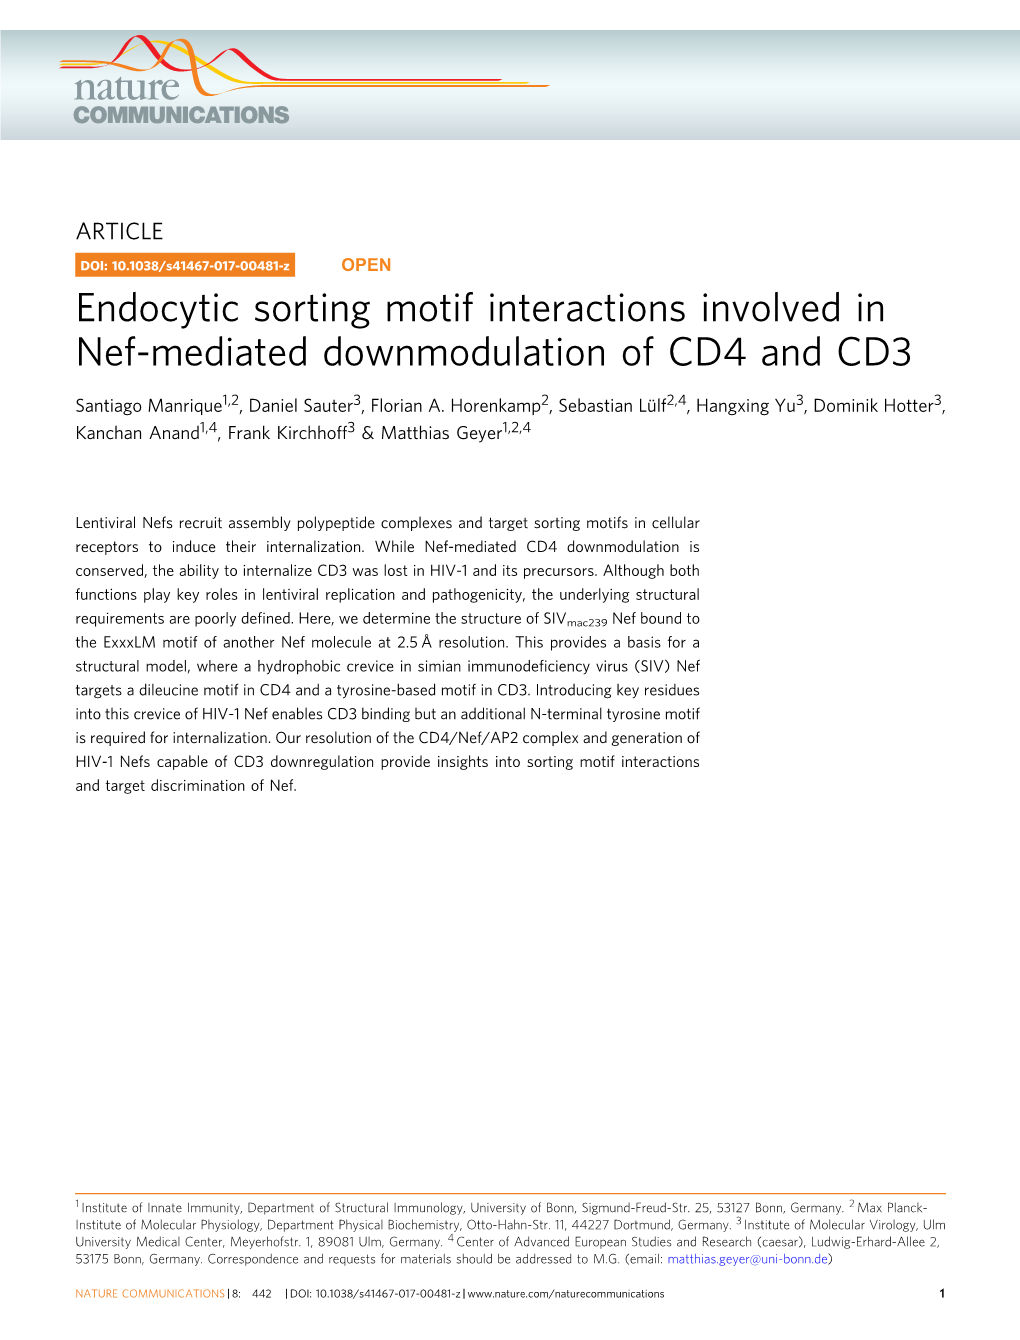 Endocytic Sorting Motif Interactions Involved in Nef-Mediated Downmodulation of CD4 and CD3